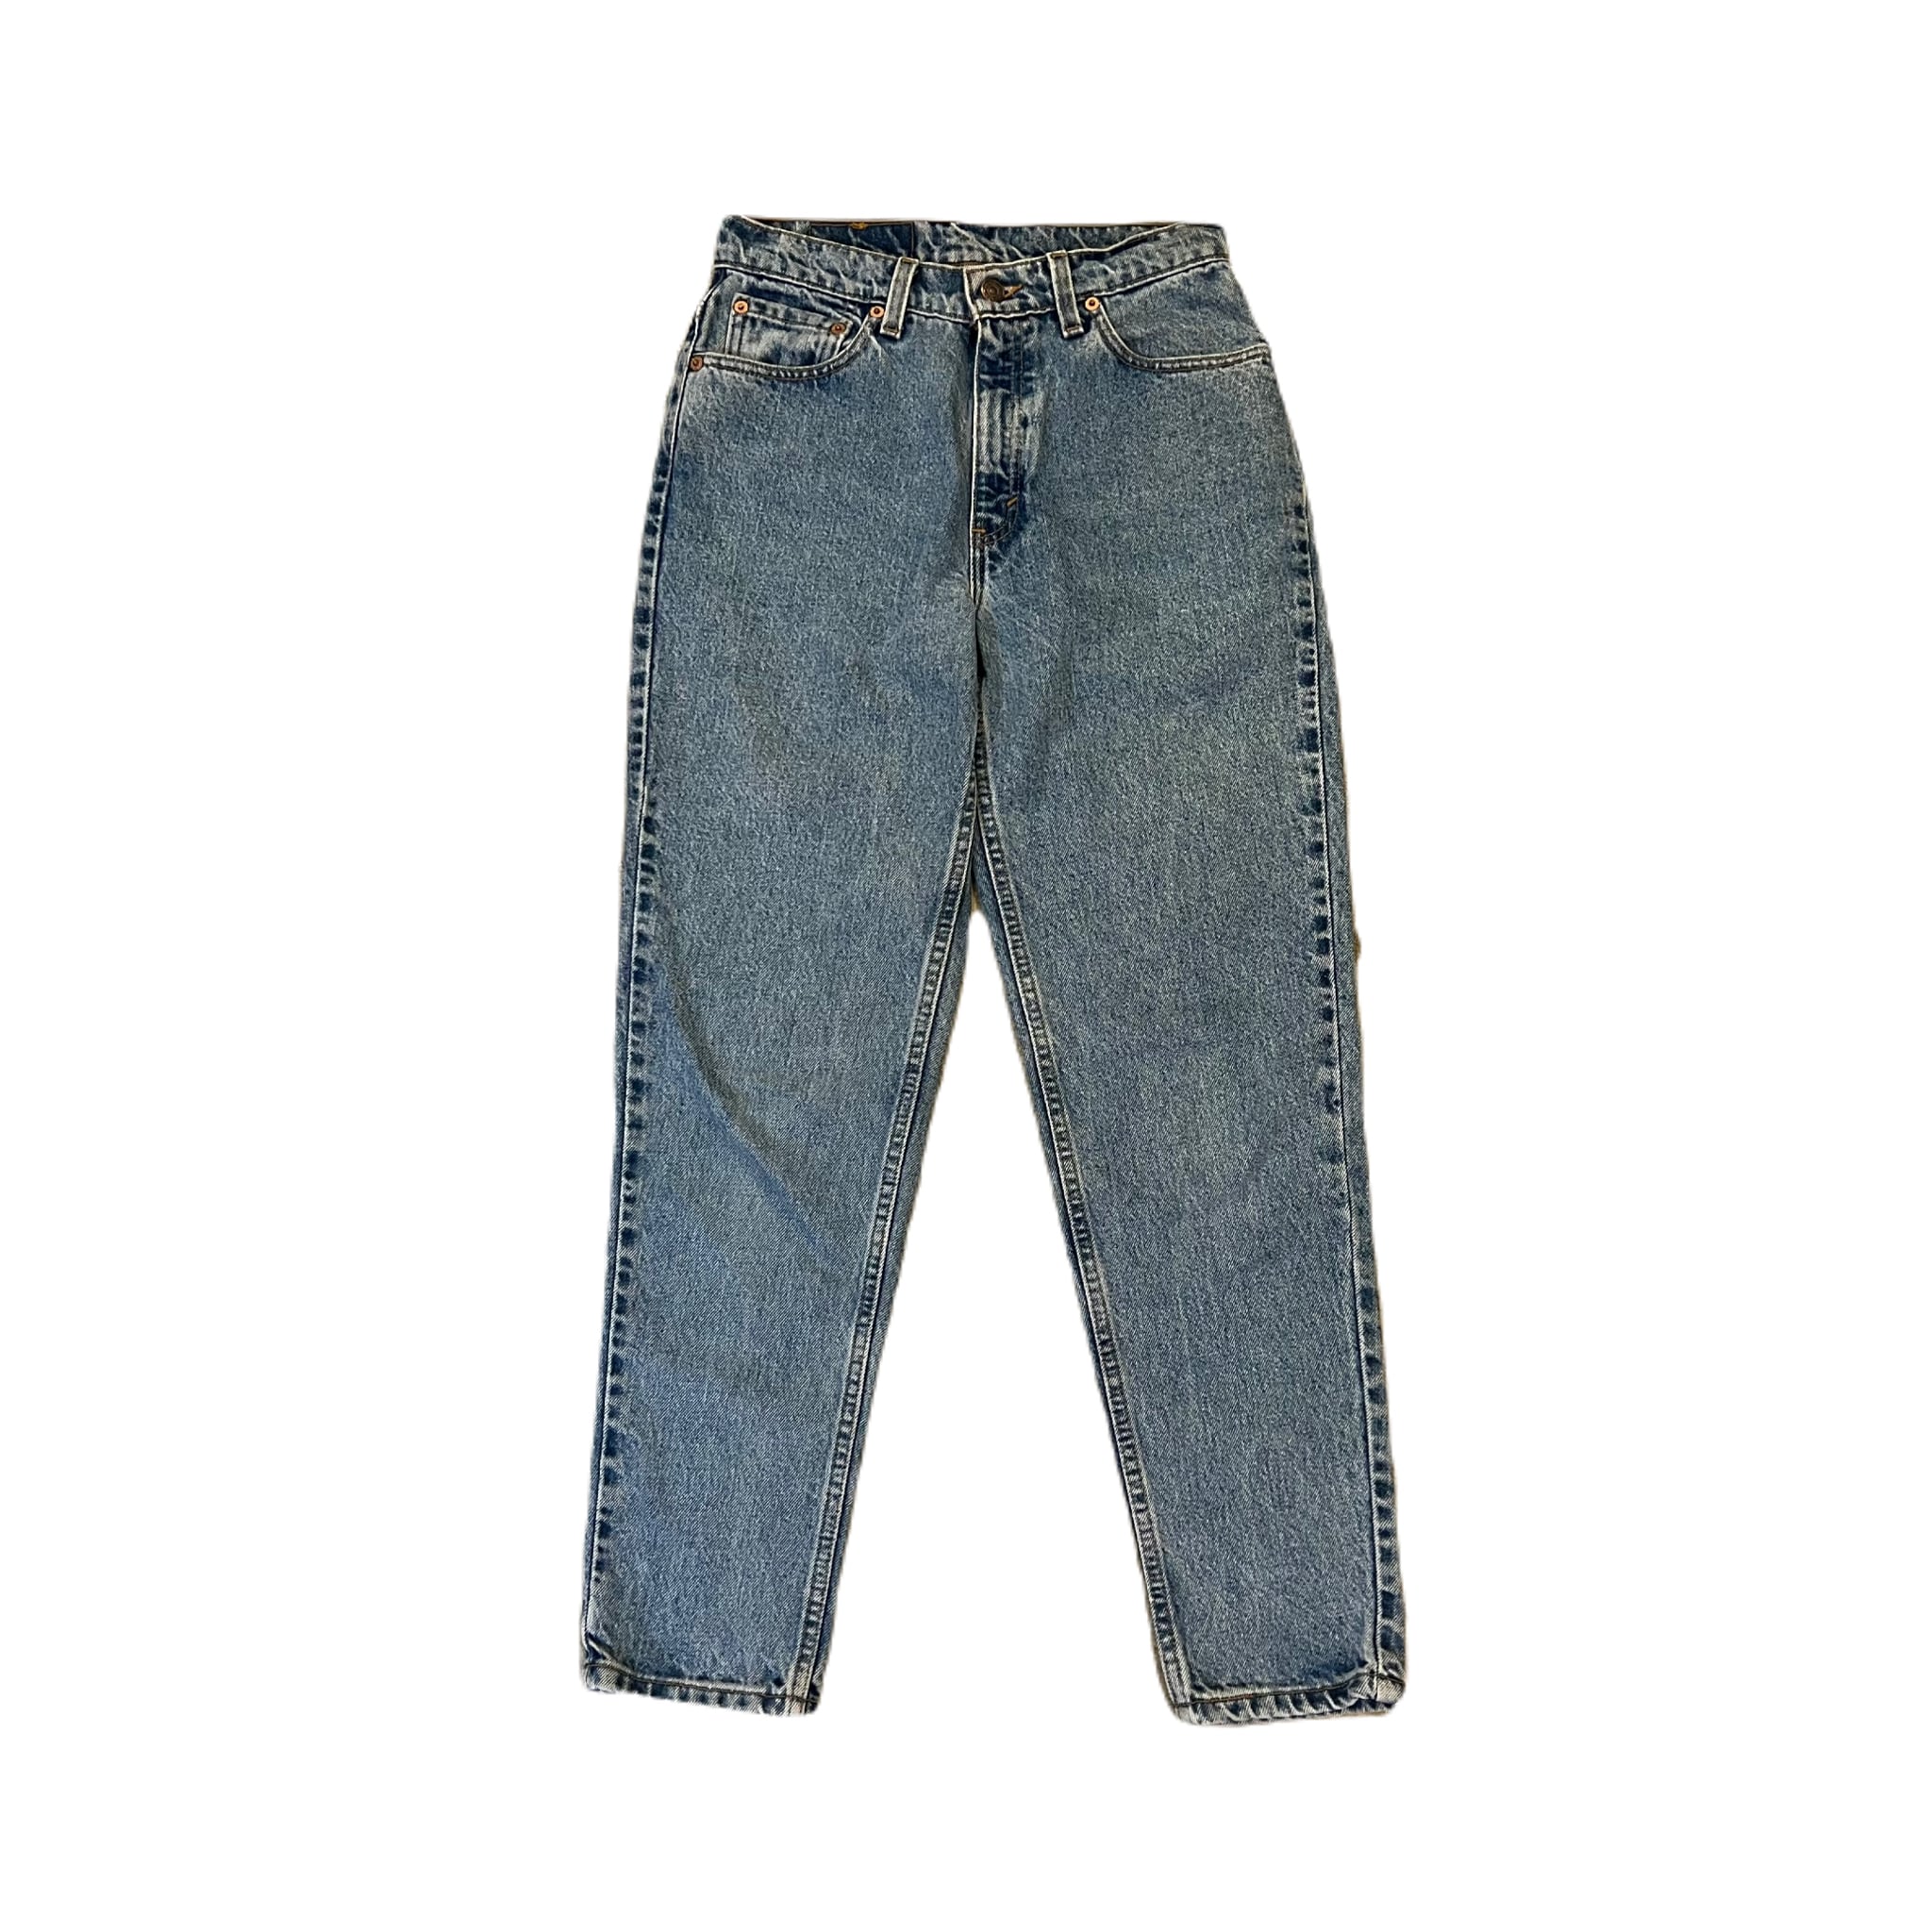 Levi's 512 Made in USA ¥10,800+tax